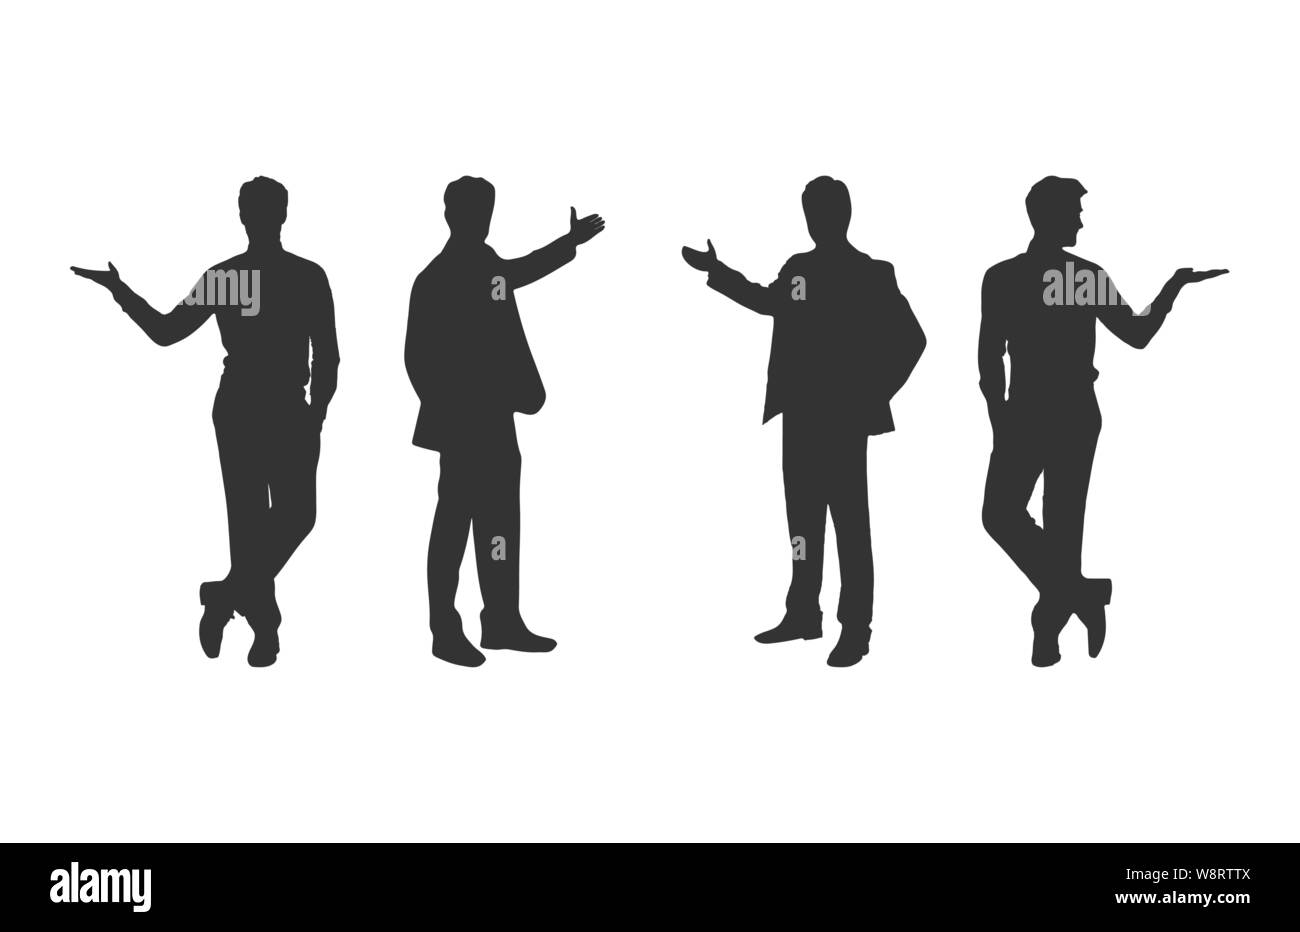 set of silhouettes of men with an outstretched arm. Flat design. Stock Vector